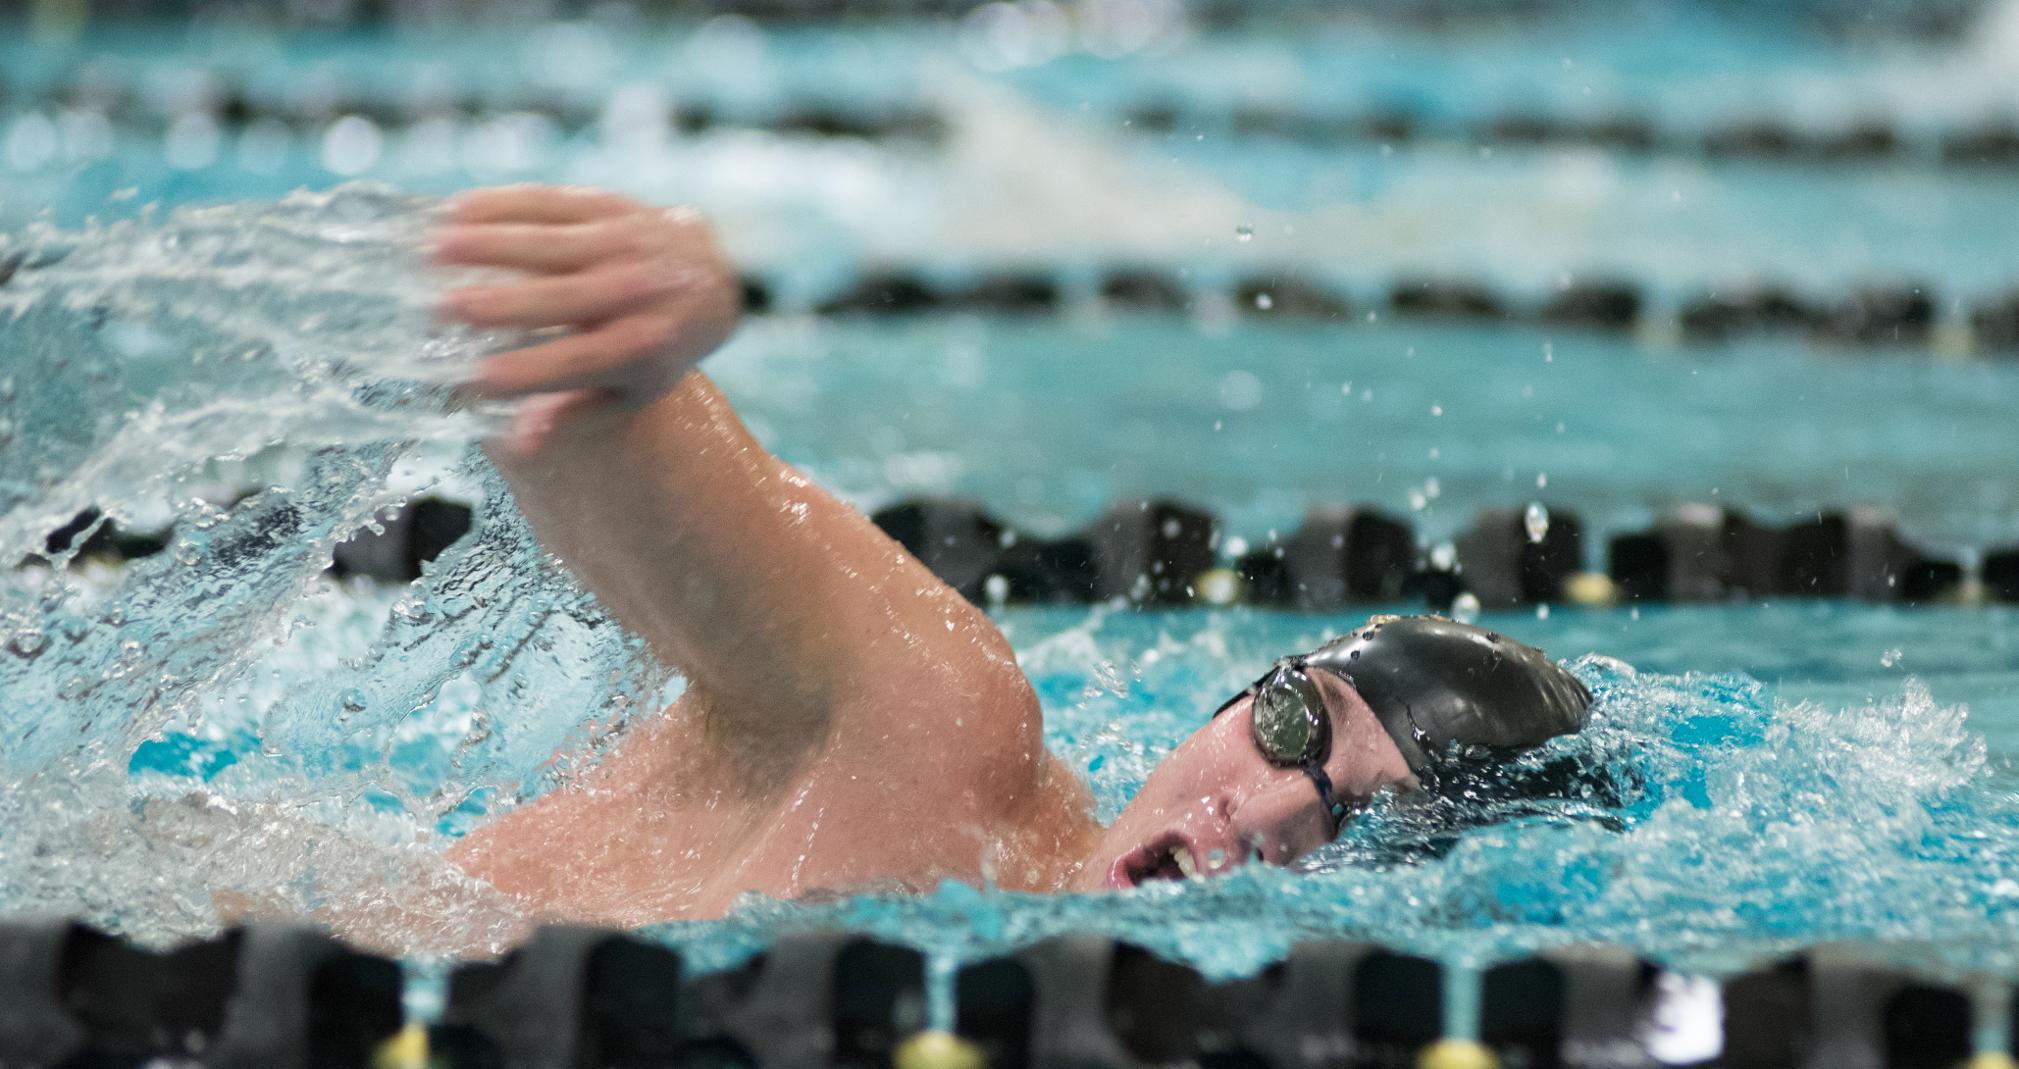 Grady Hilgendorf finished 20th in the 500-yard freestyle at the Wisconsin College Showcase.